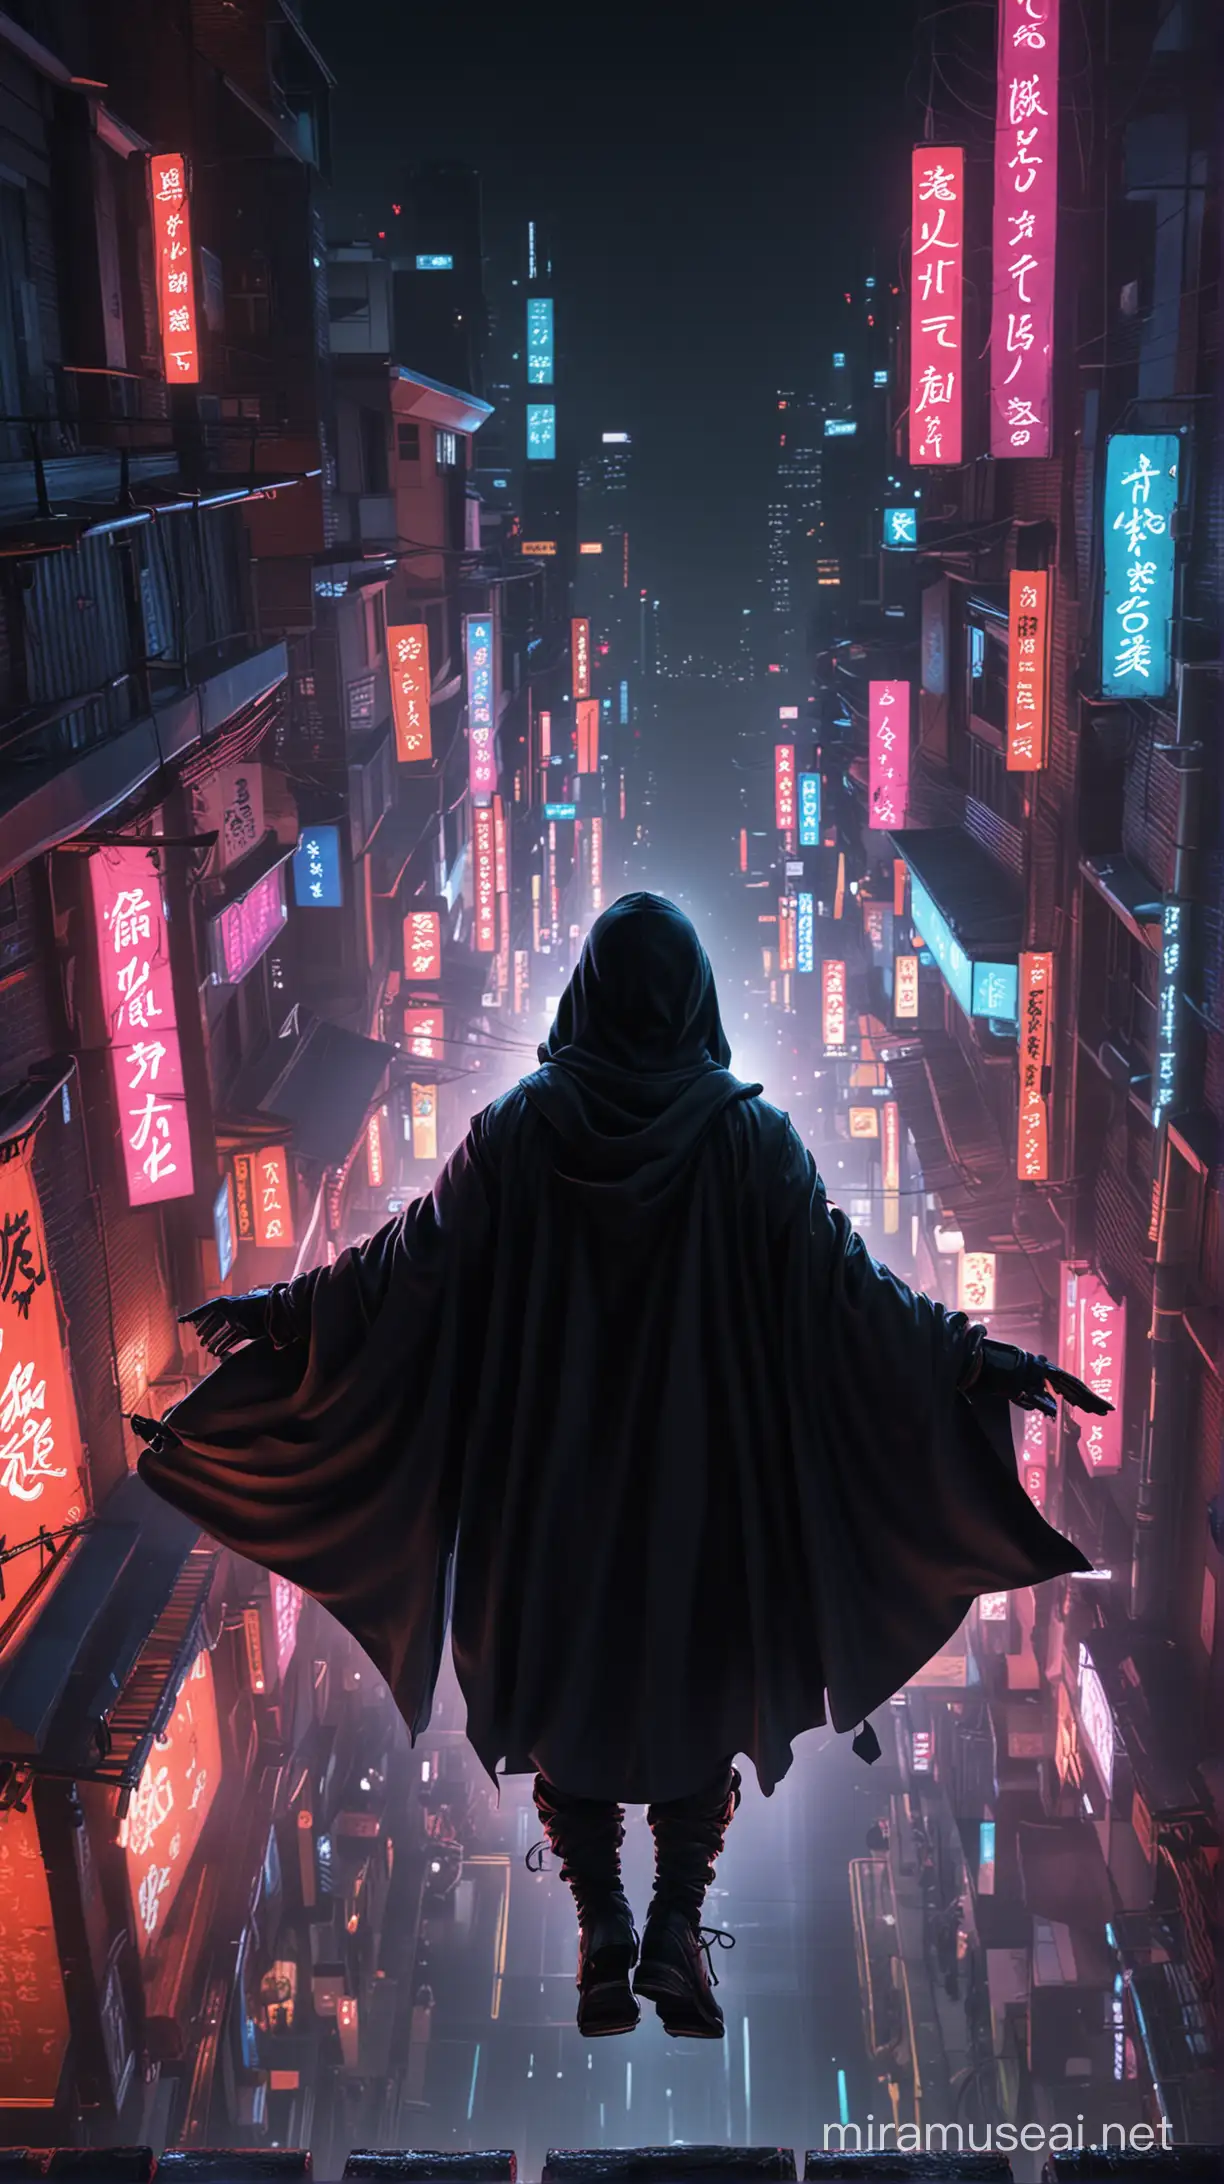 A perspective view from behind a ninja, looking down onto a neon-lit street from a high vantage point. The ninja's cloak flutters in the wind, revealing glimpses of neon light underneath, suggesting the blending of tradition and futurism.